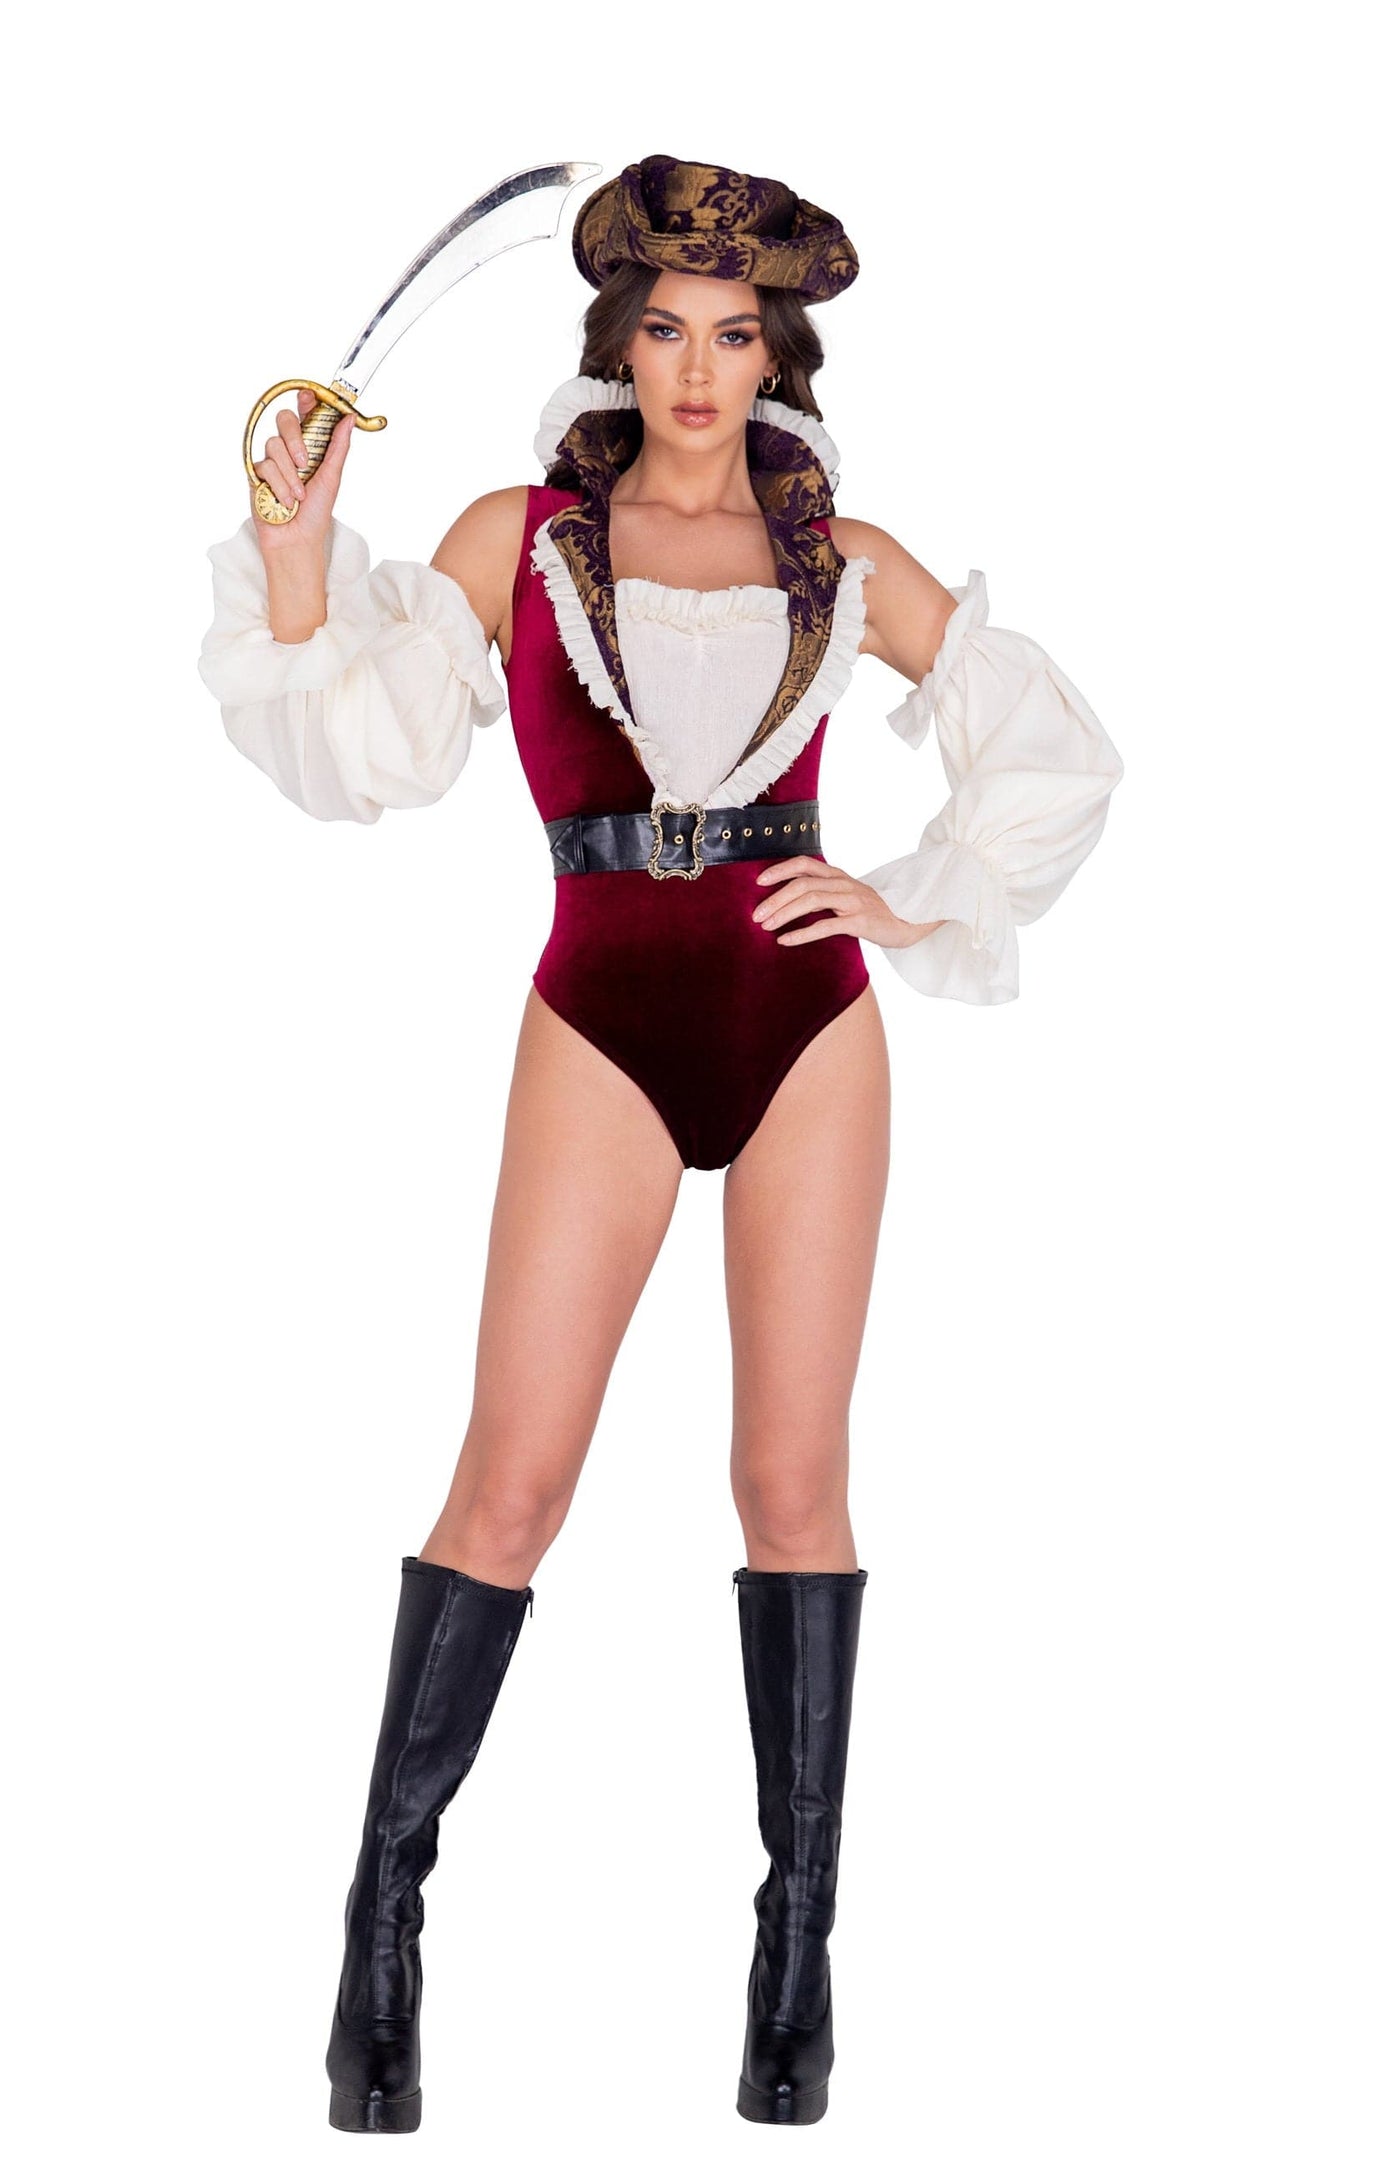 5pc. Sultry Pirate Women's Costume - For Love of Lingerie